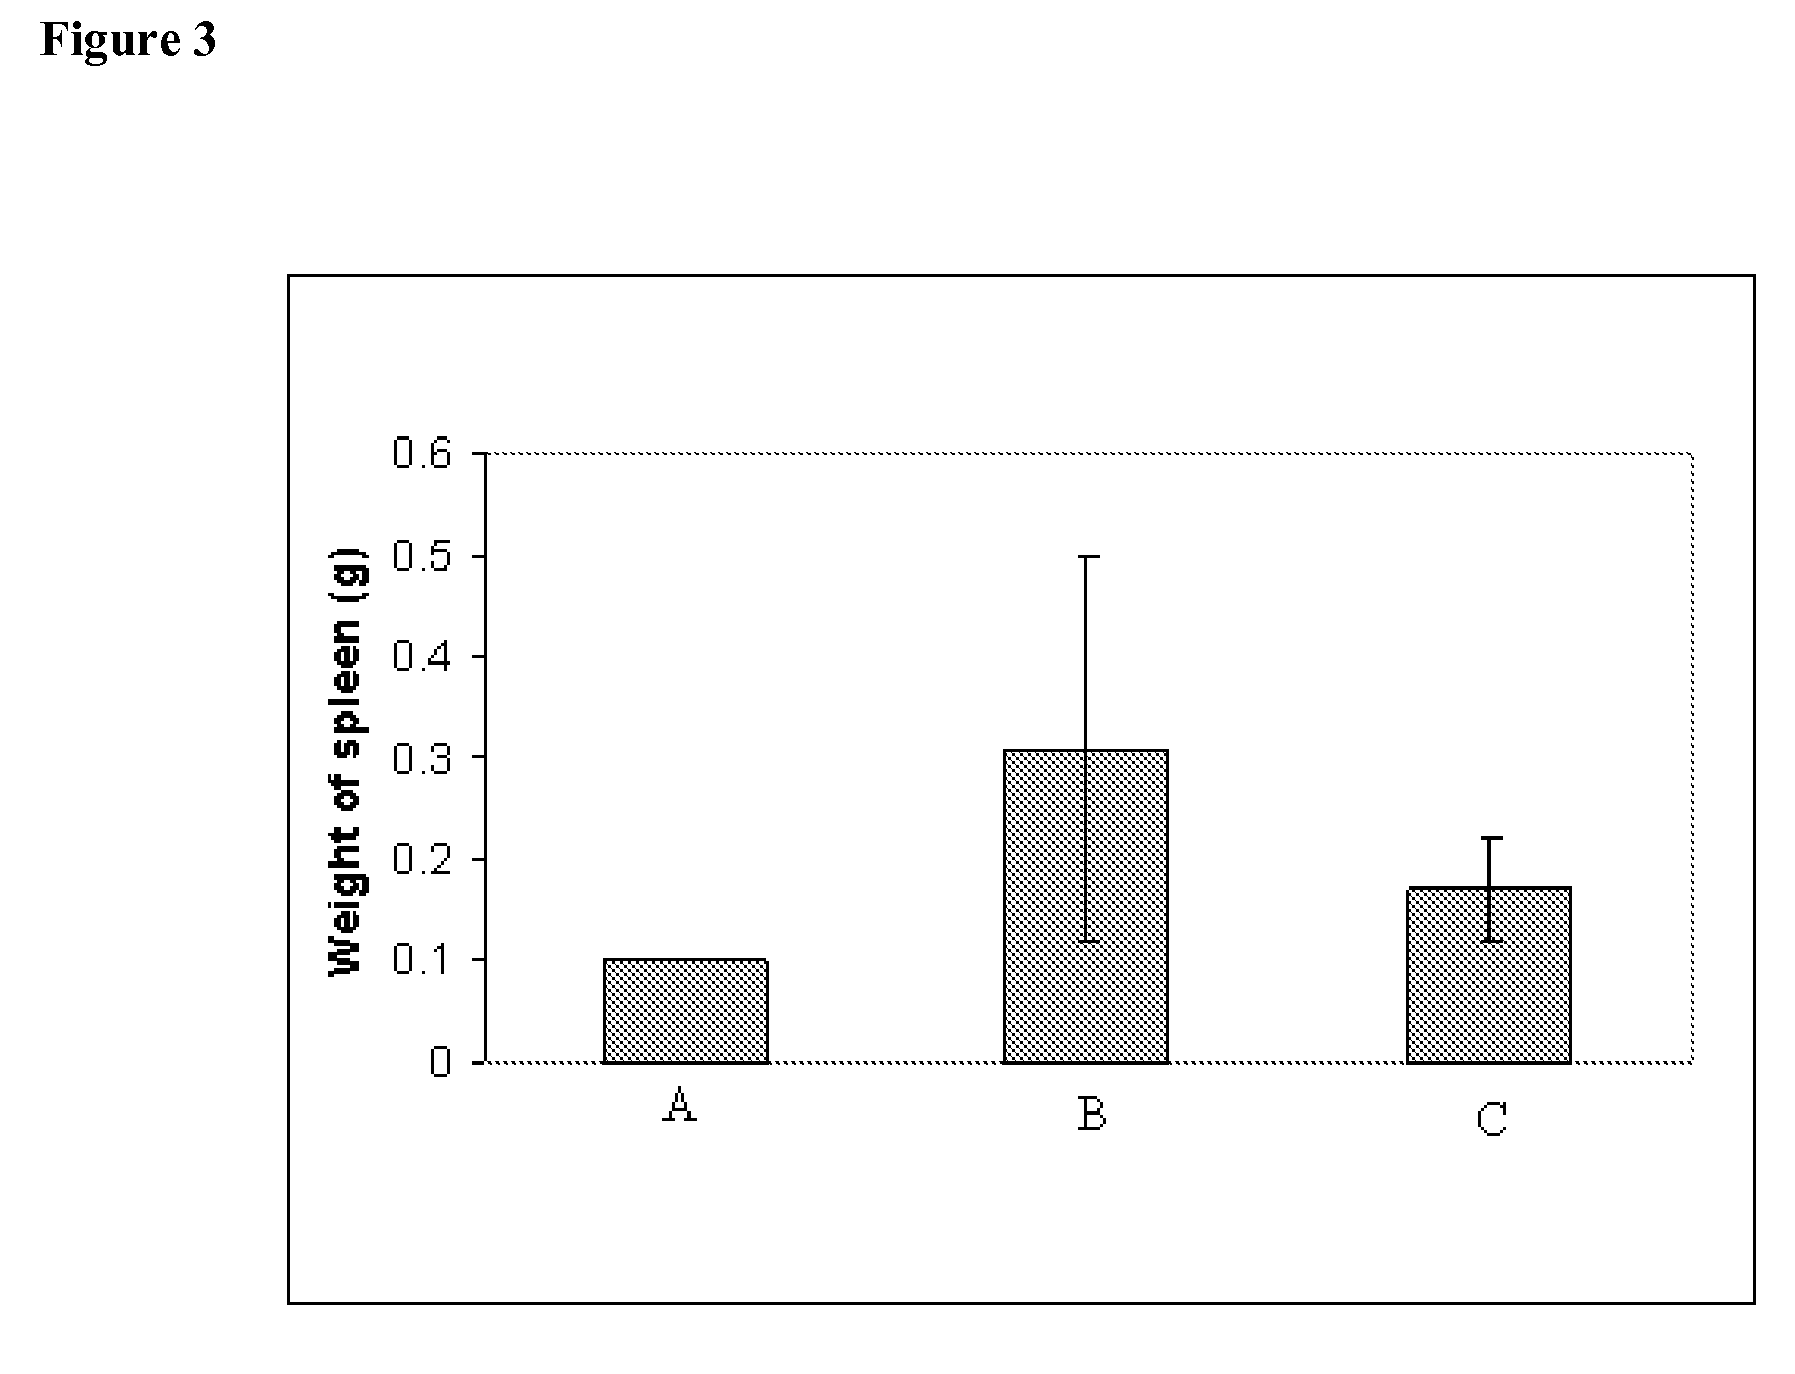 Methods of Treating Cancer with High Potency Lipid-Based Platinum Compound Formulations Administered Intravenously